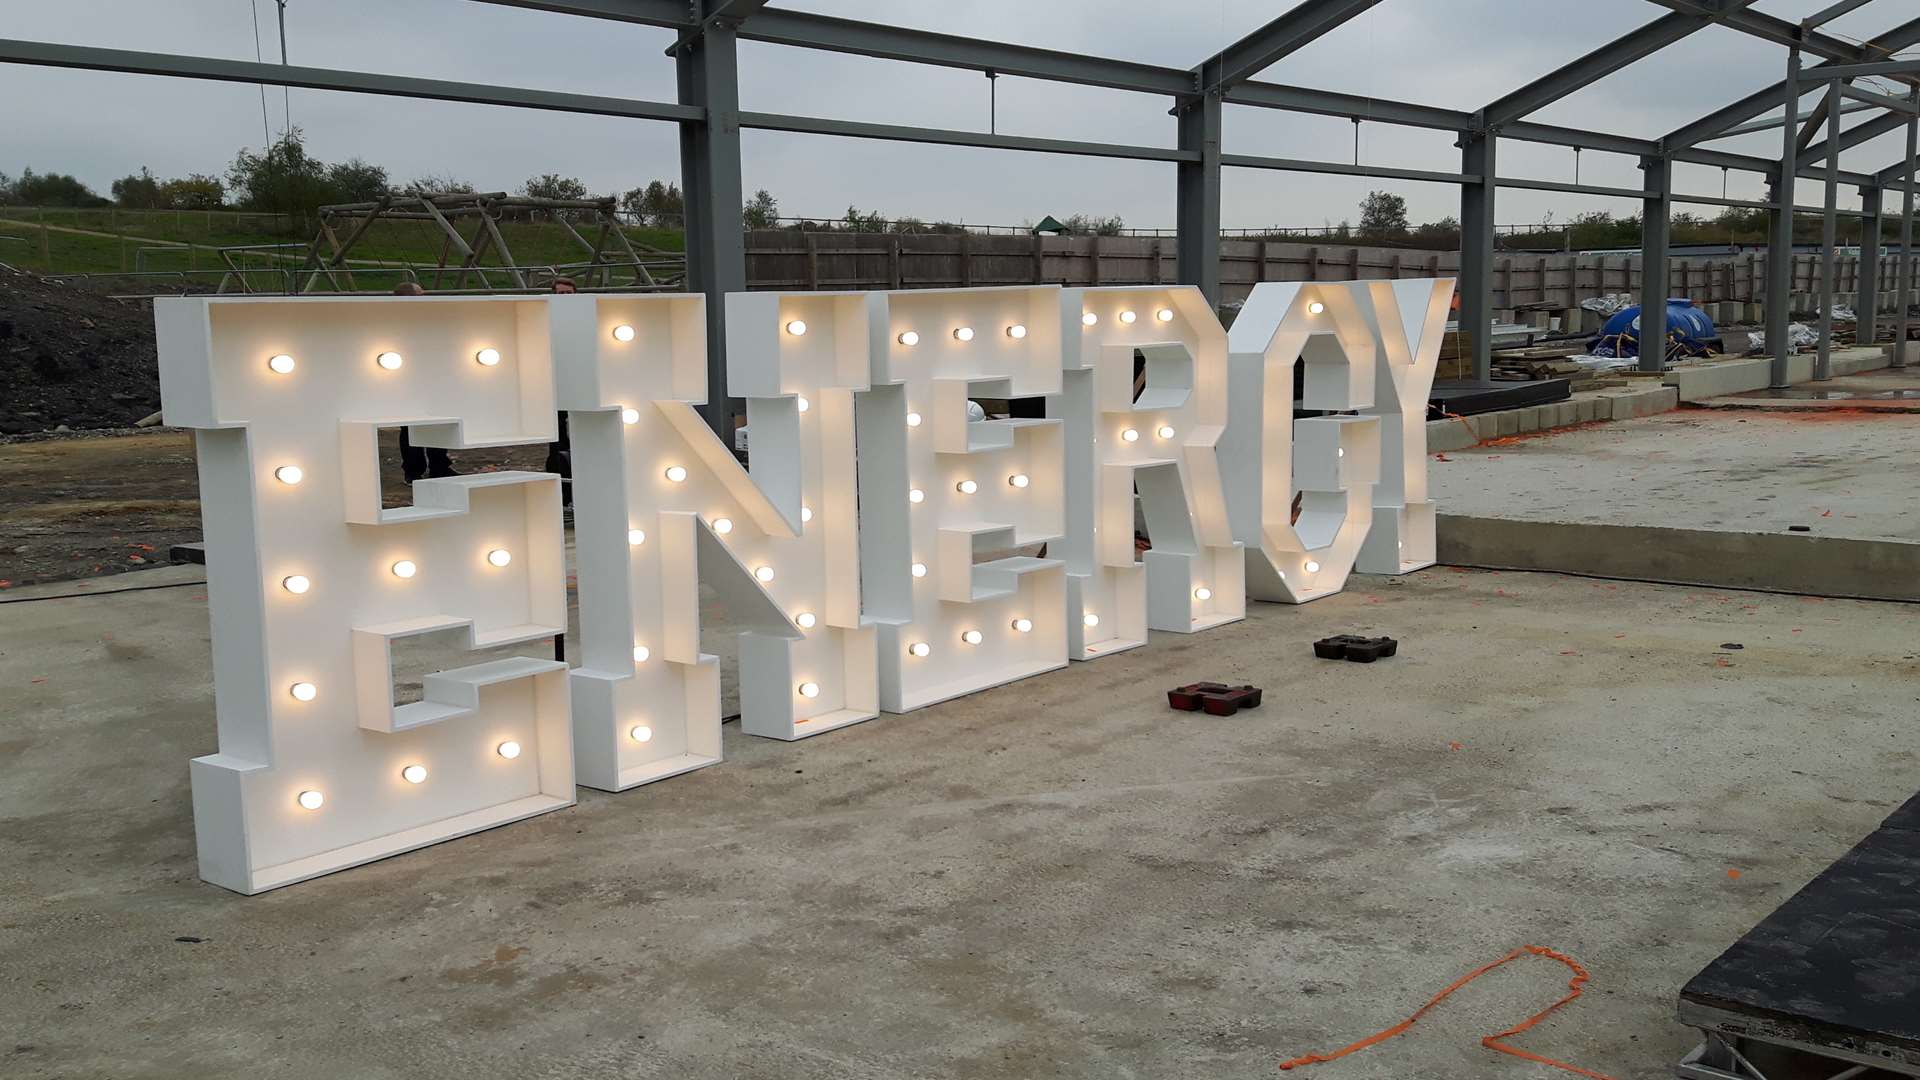 The topping out ceremony had an energy theme at Betteshanger Country Park